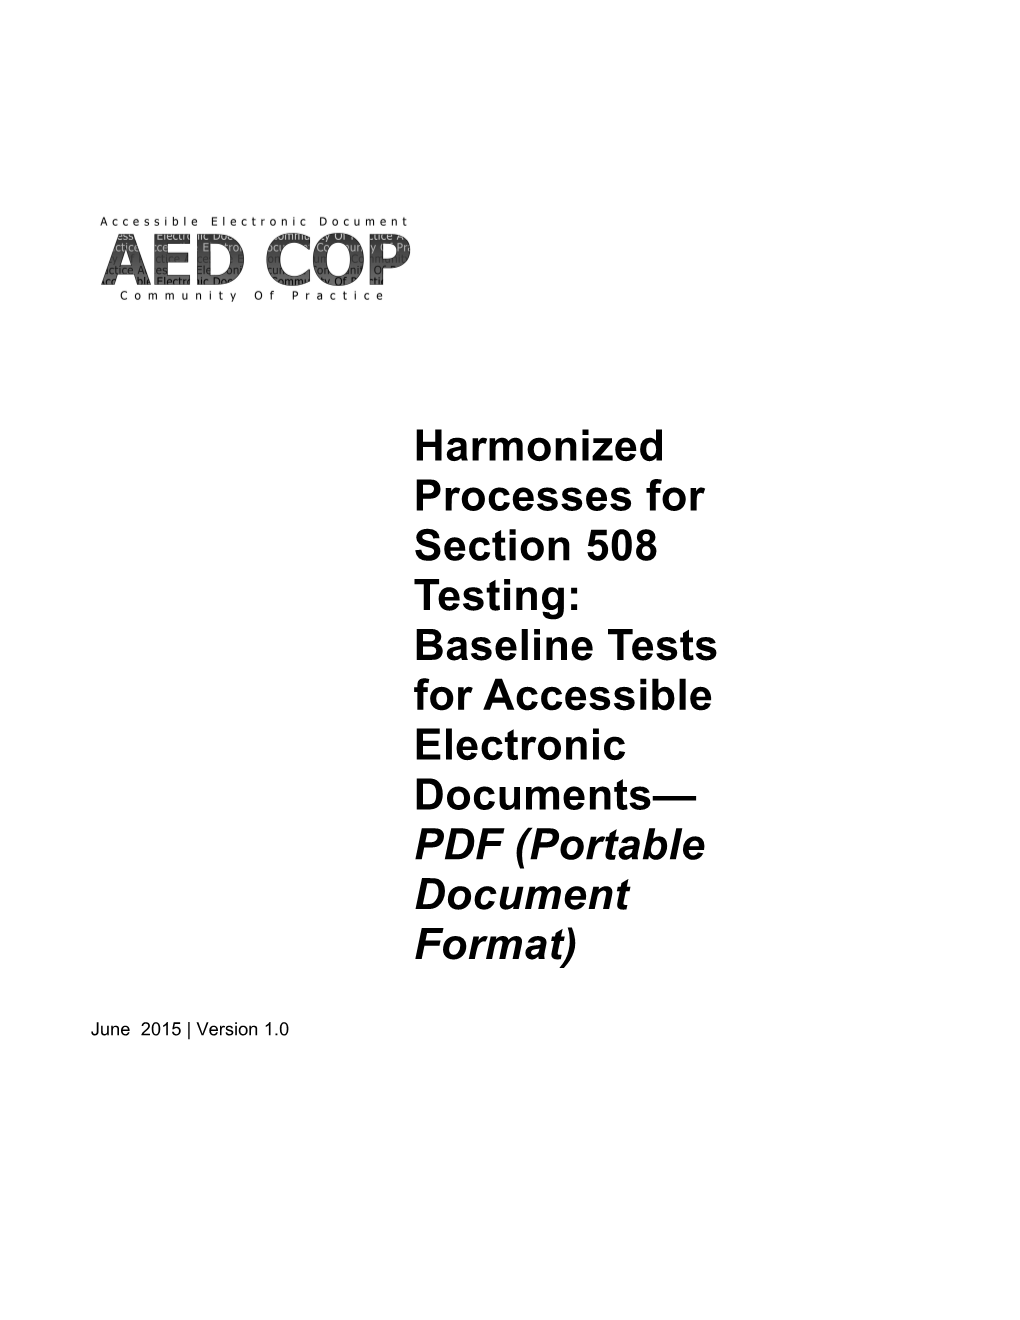 Harmonized Processes for Section 508 Testing: Baseline Tests for Document & MS Word 2010